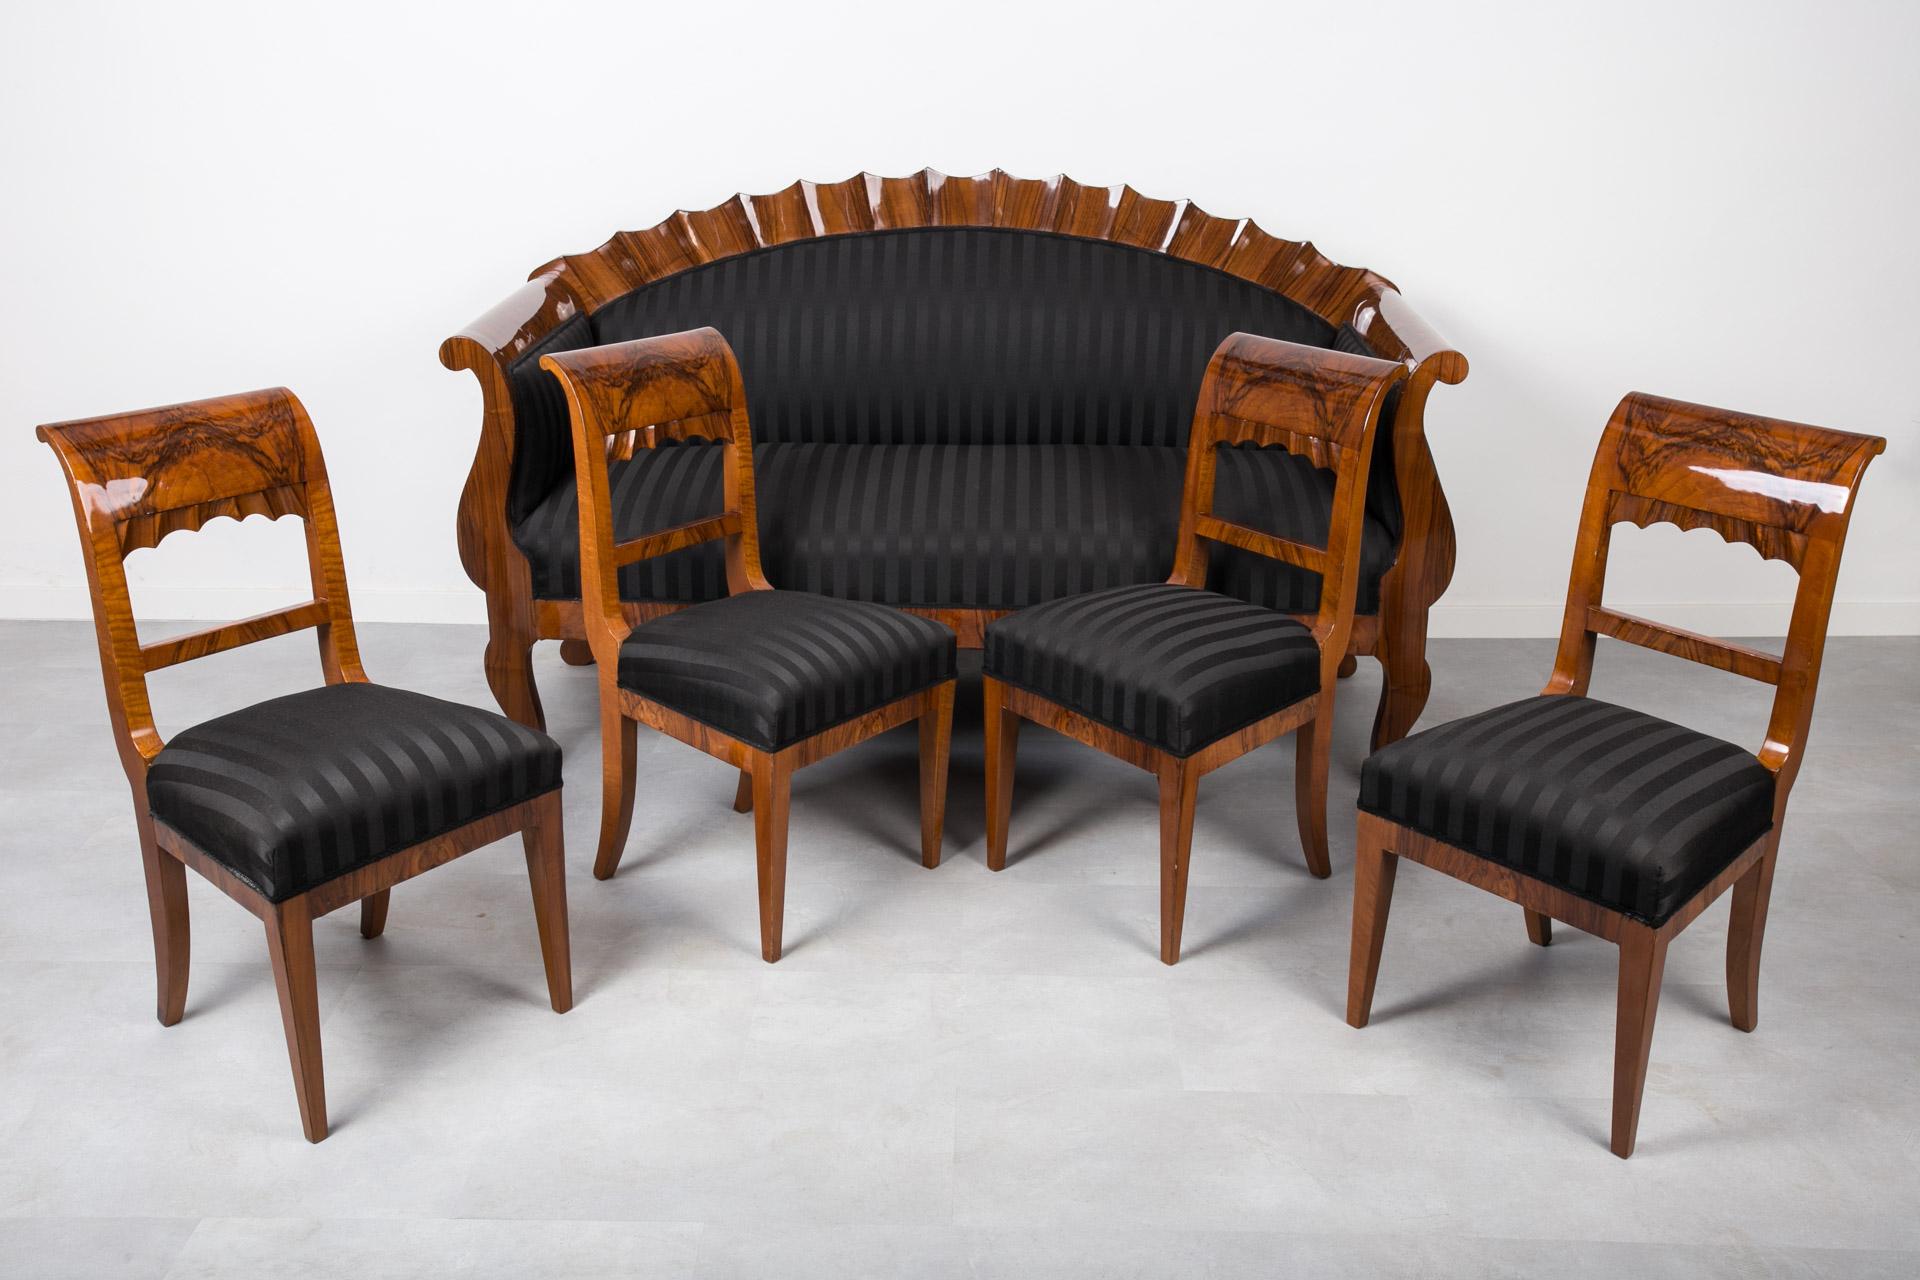 This marvelous Biedermeier sofa set comes from Germany and was made in the 19th century. All pieces are after complete renovation. Wooden elements have been cleaned and refinished with traditional shellac polish, applied by hand which apart from